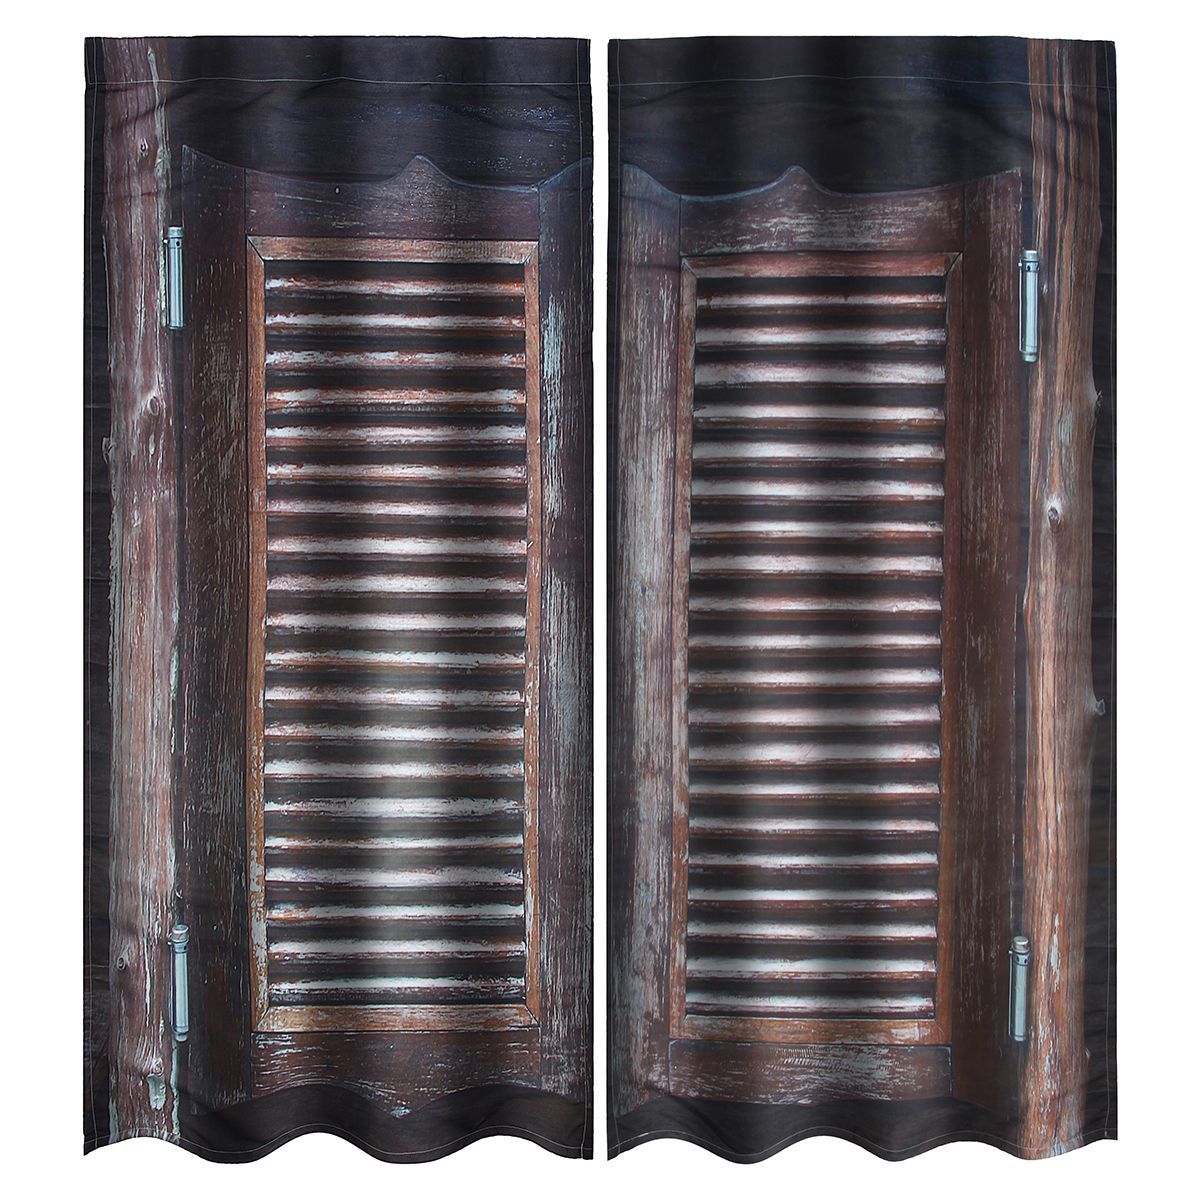 2-Panel-3D-Pringting-Blackout-Window-Curtains-Screens-Thermal-Drapes-For-Study-Room-Bedroom-1545747